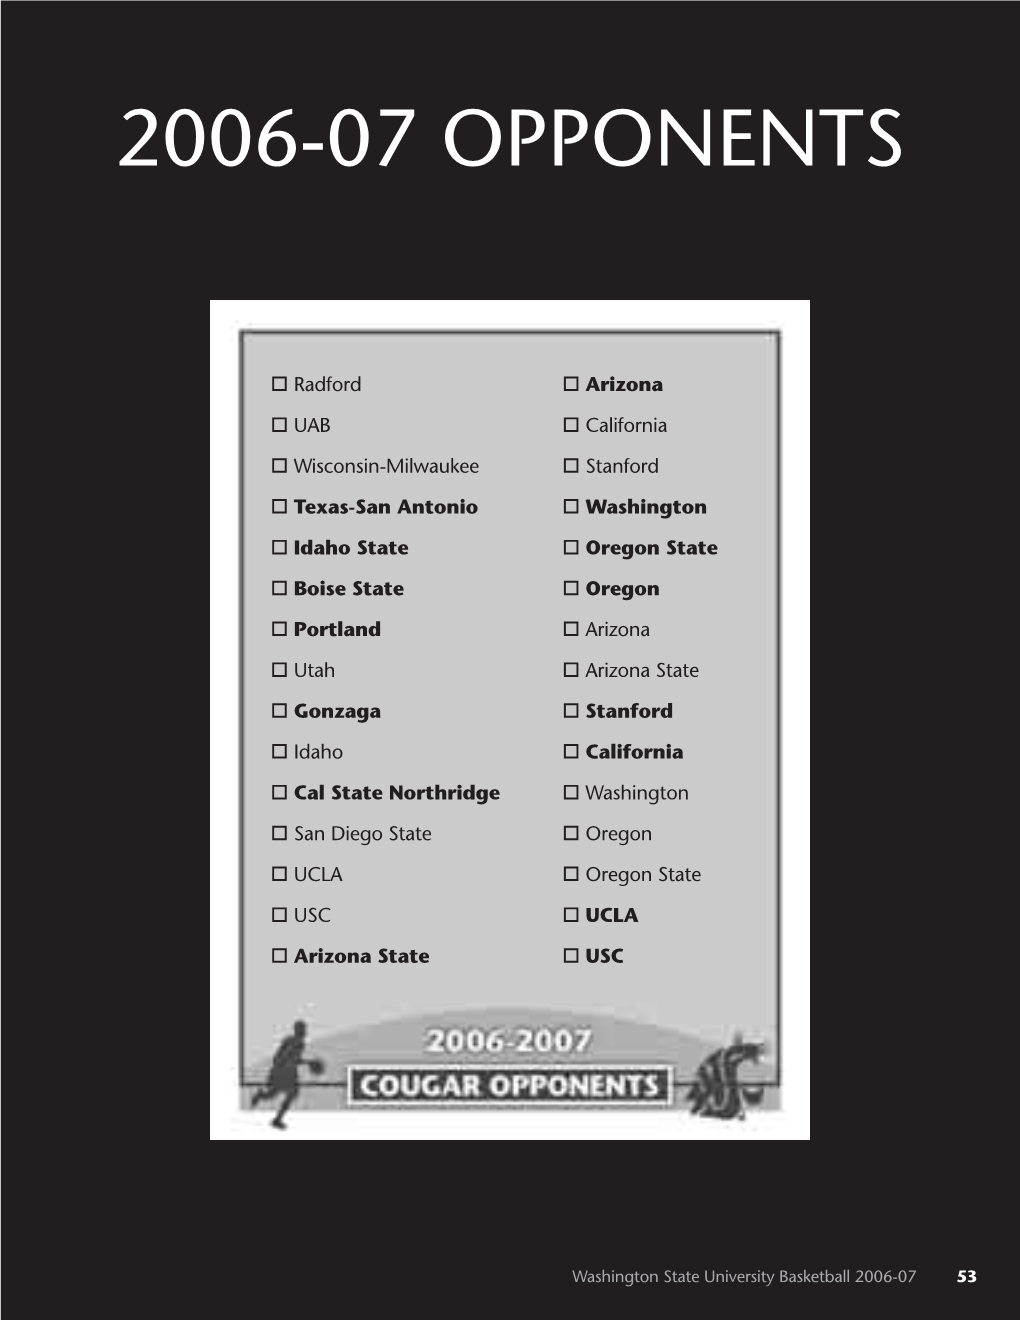 2006-07 Opponents